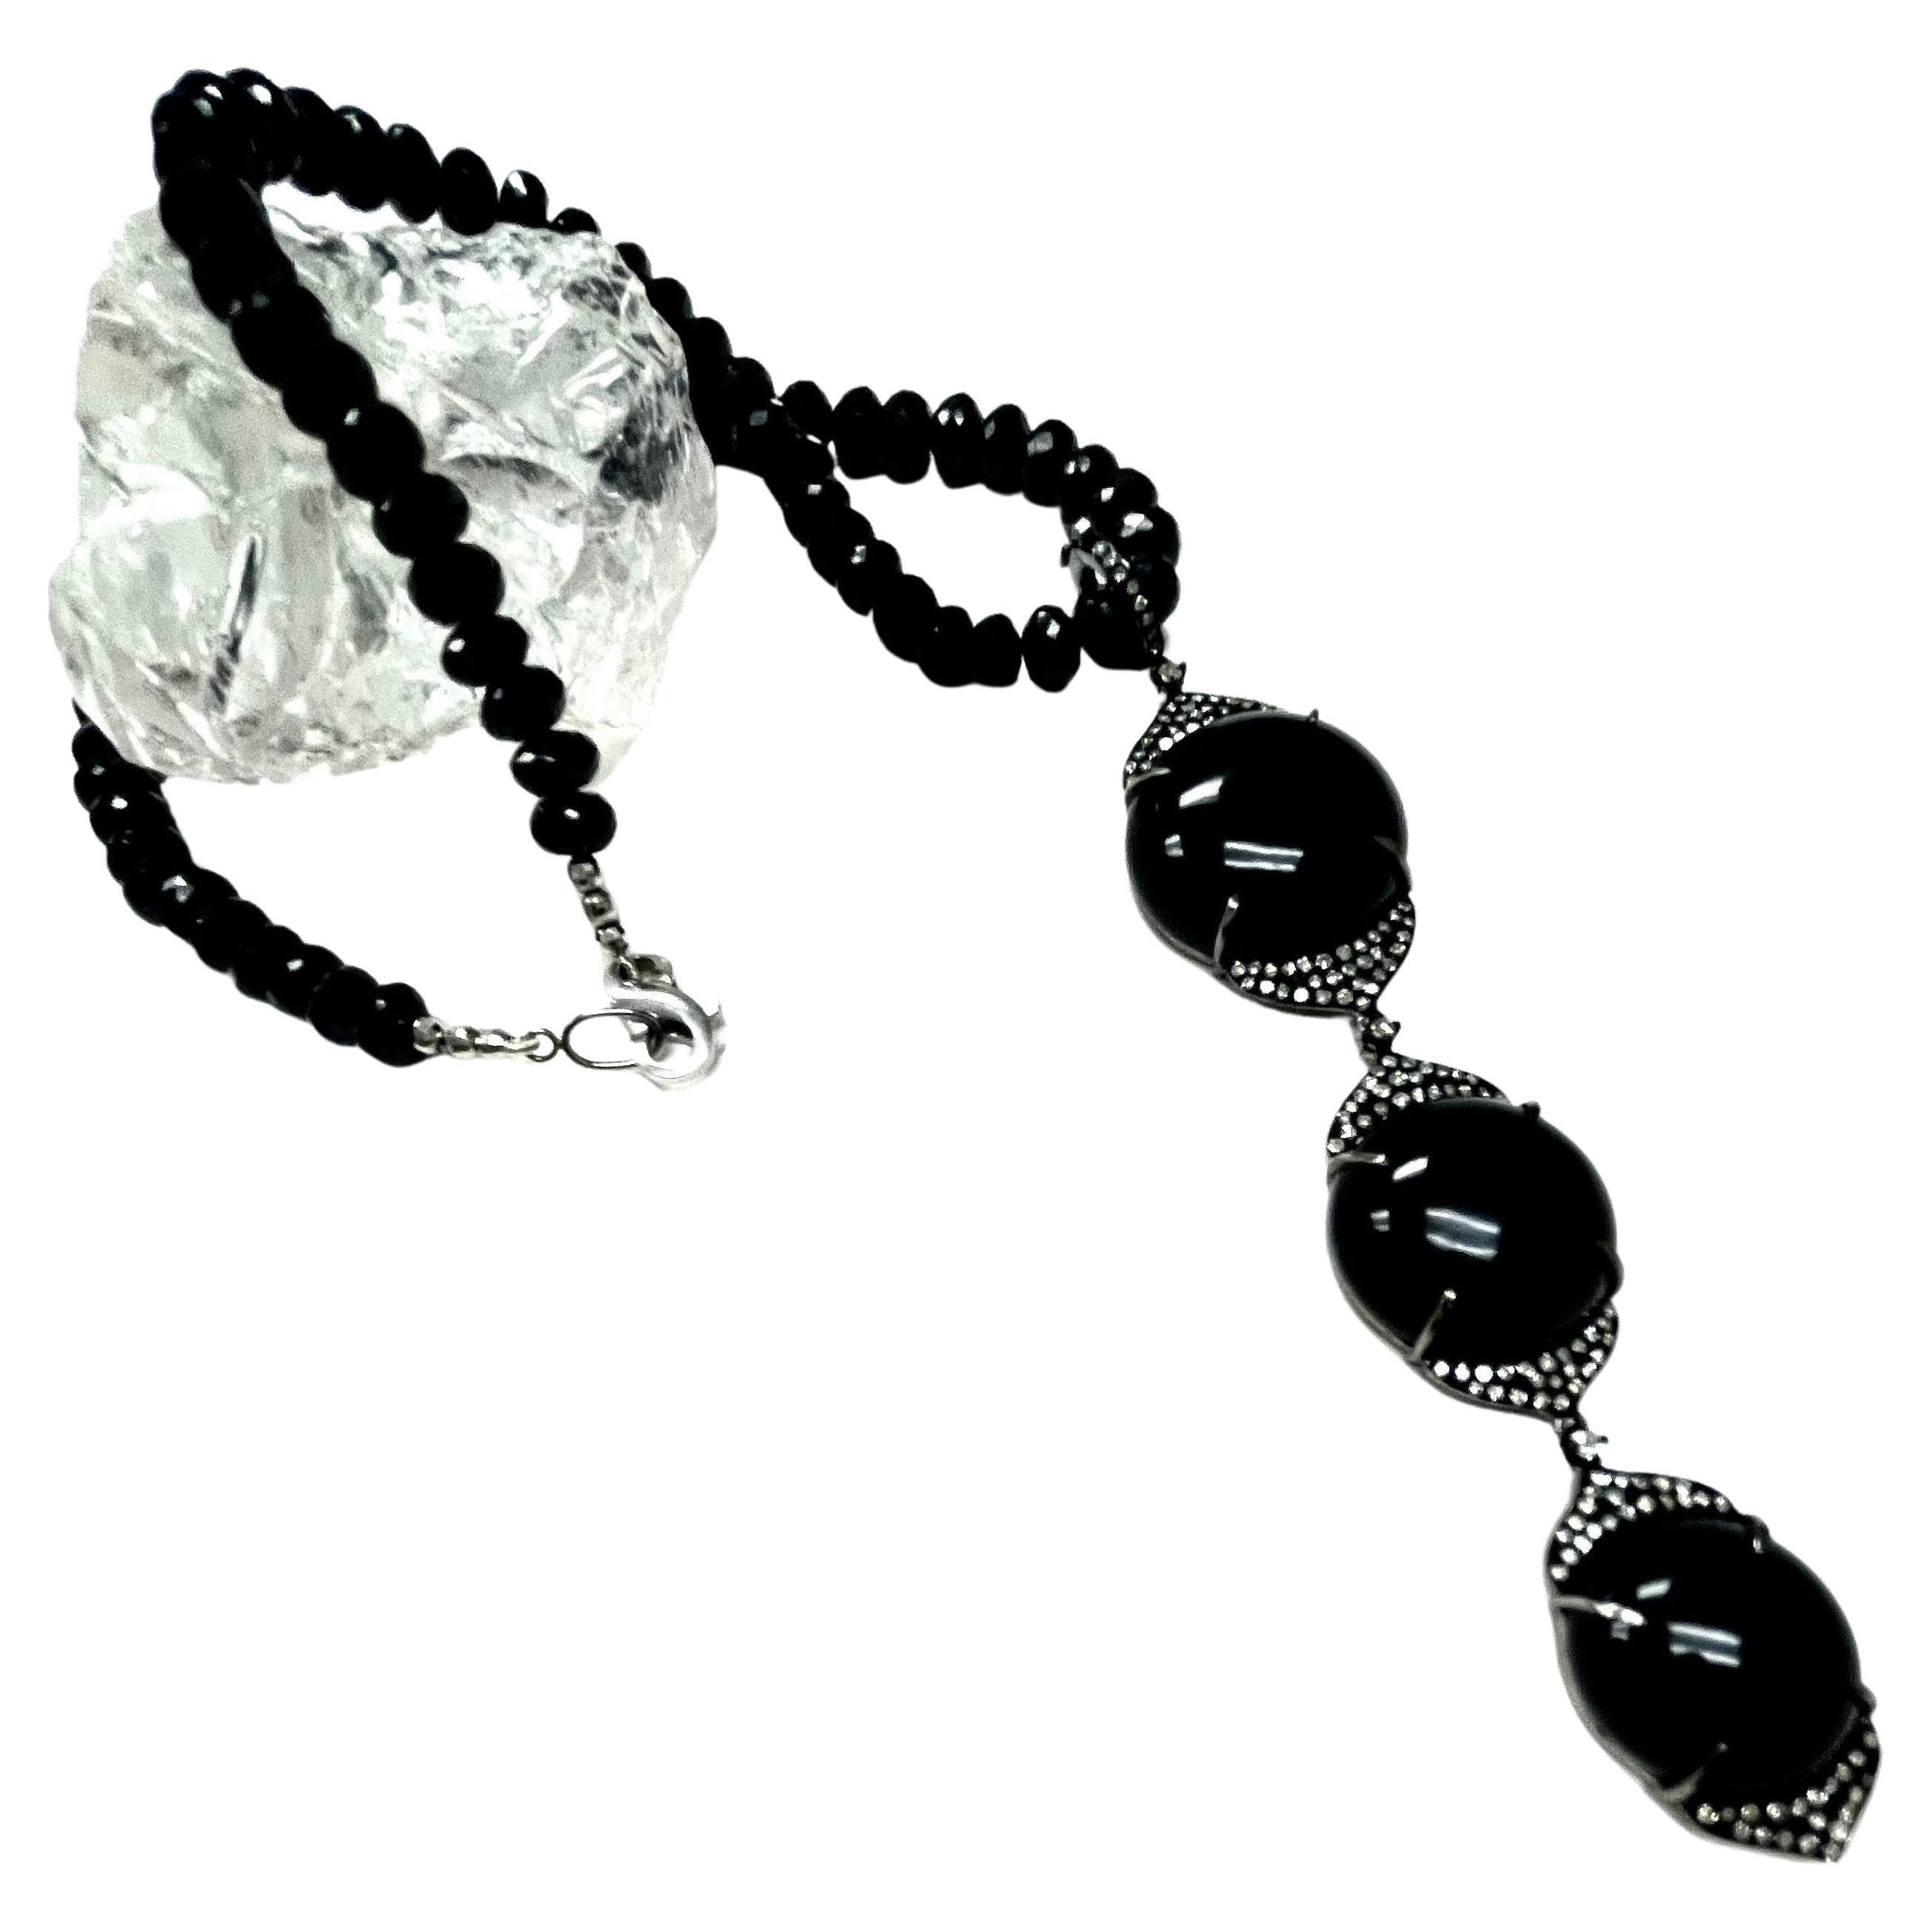 Description
Elegant onyx cabochons with pave diamonds suspended from a beautiful faceted black spinel necklace.
Item # N3821

Materials and Weight
Onyx 64cts, 23, 20, and 17mm, cabochon round shape
Pave diamonds 1.42cts.
Faceted balls 3mm 14k white